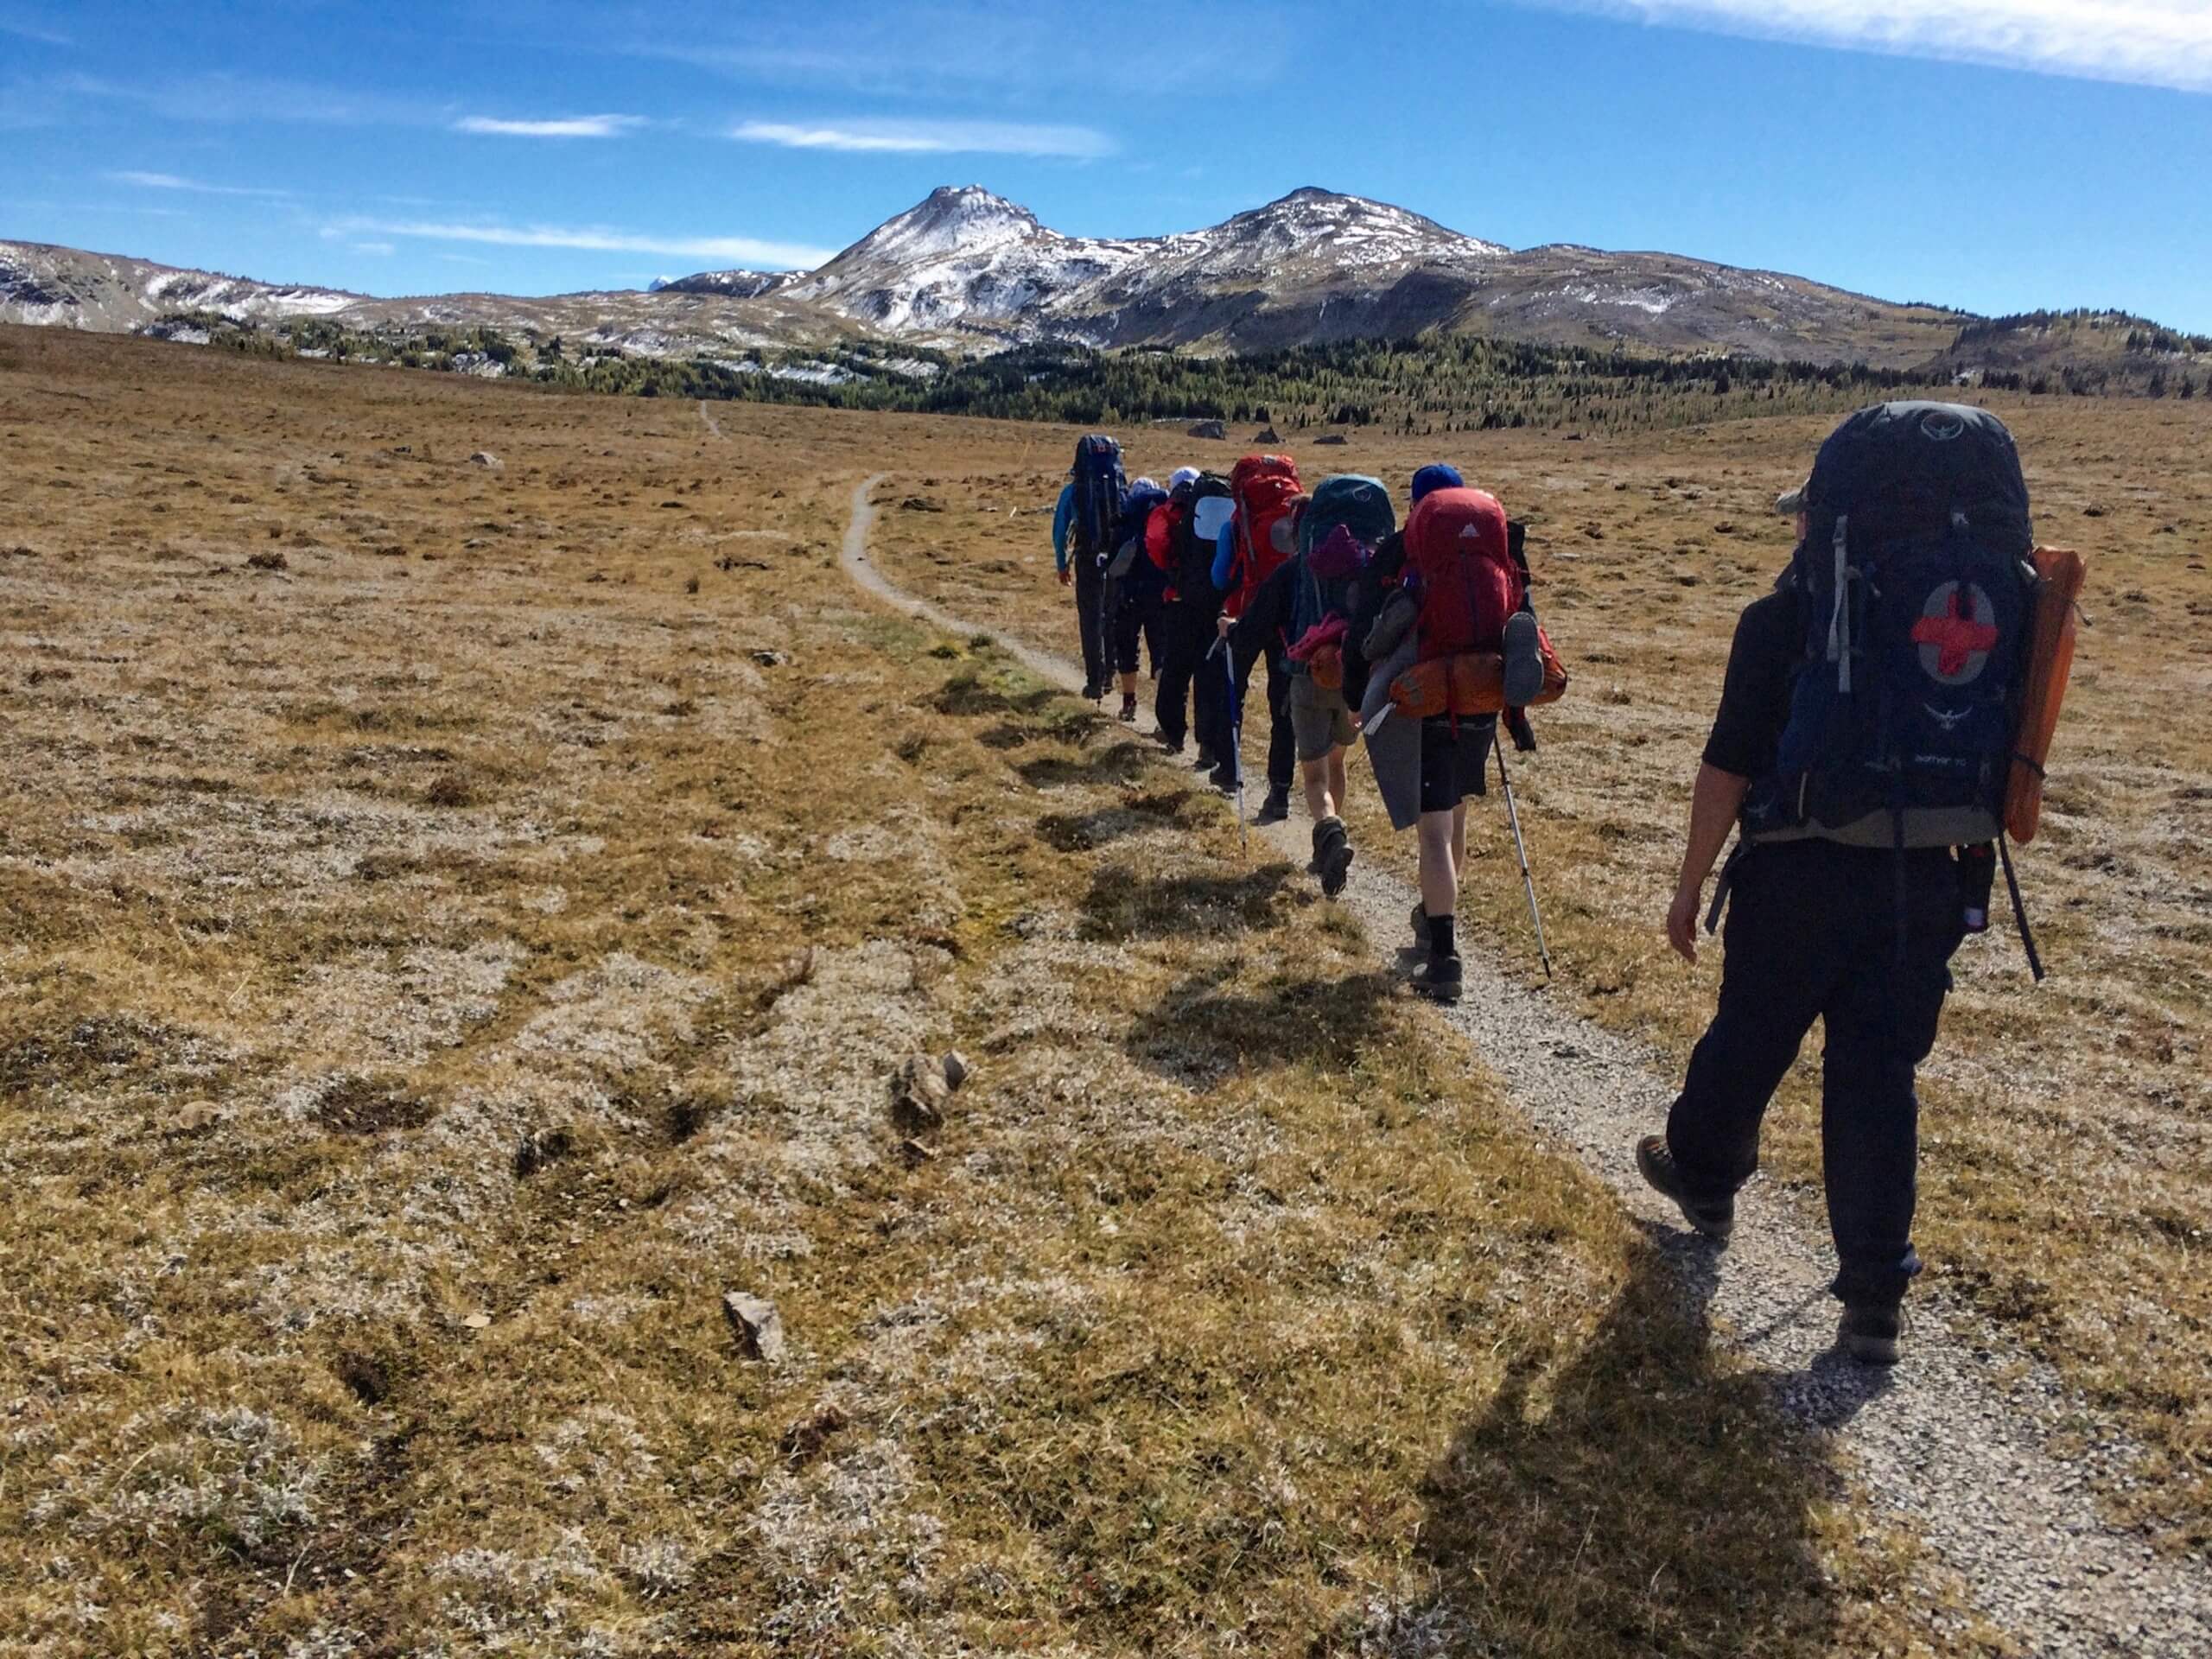 Group of backpackers trekking in Banff NP